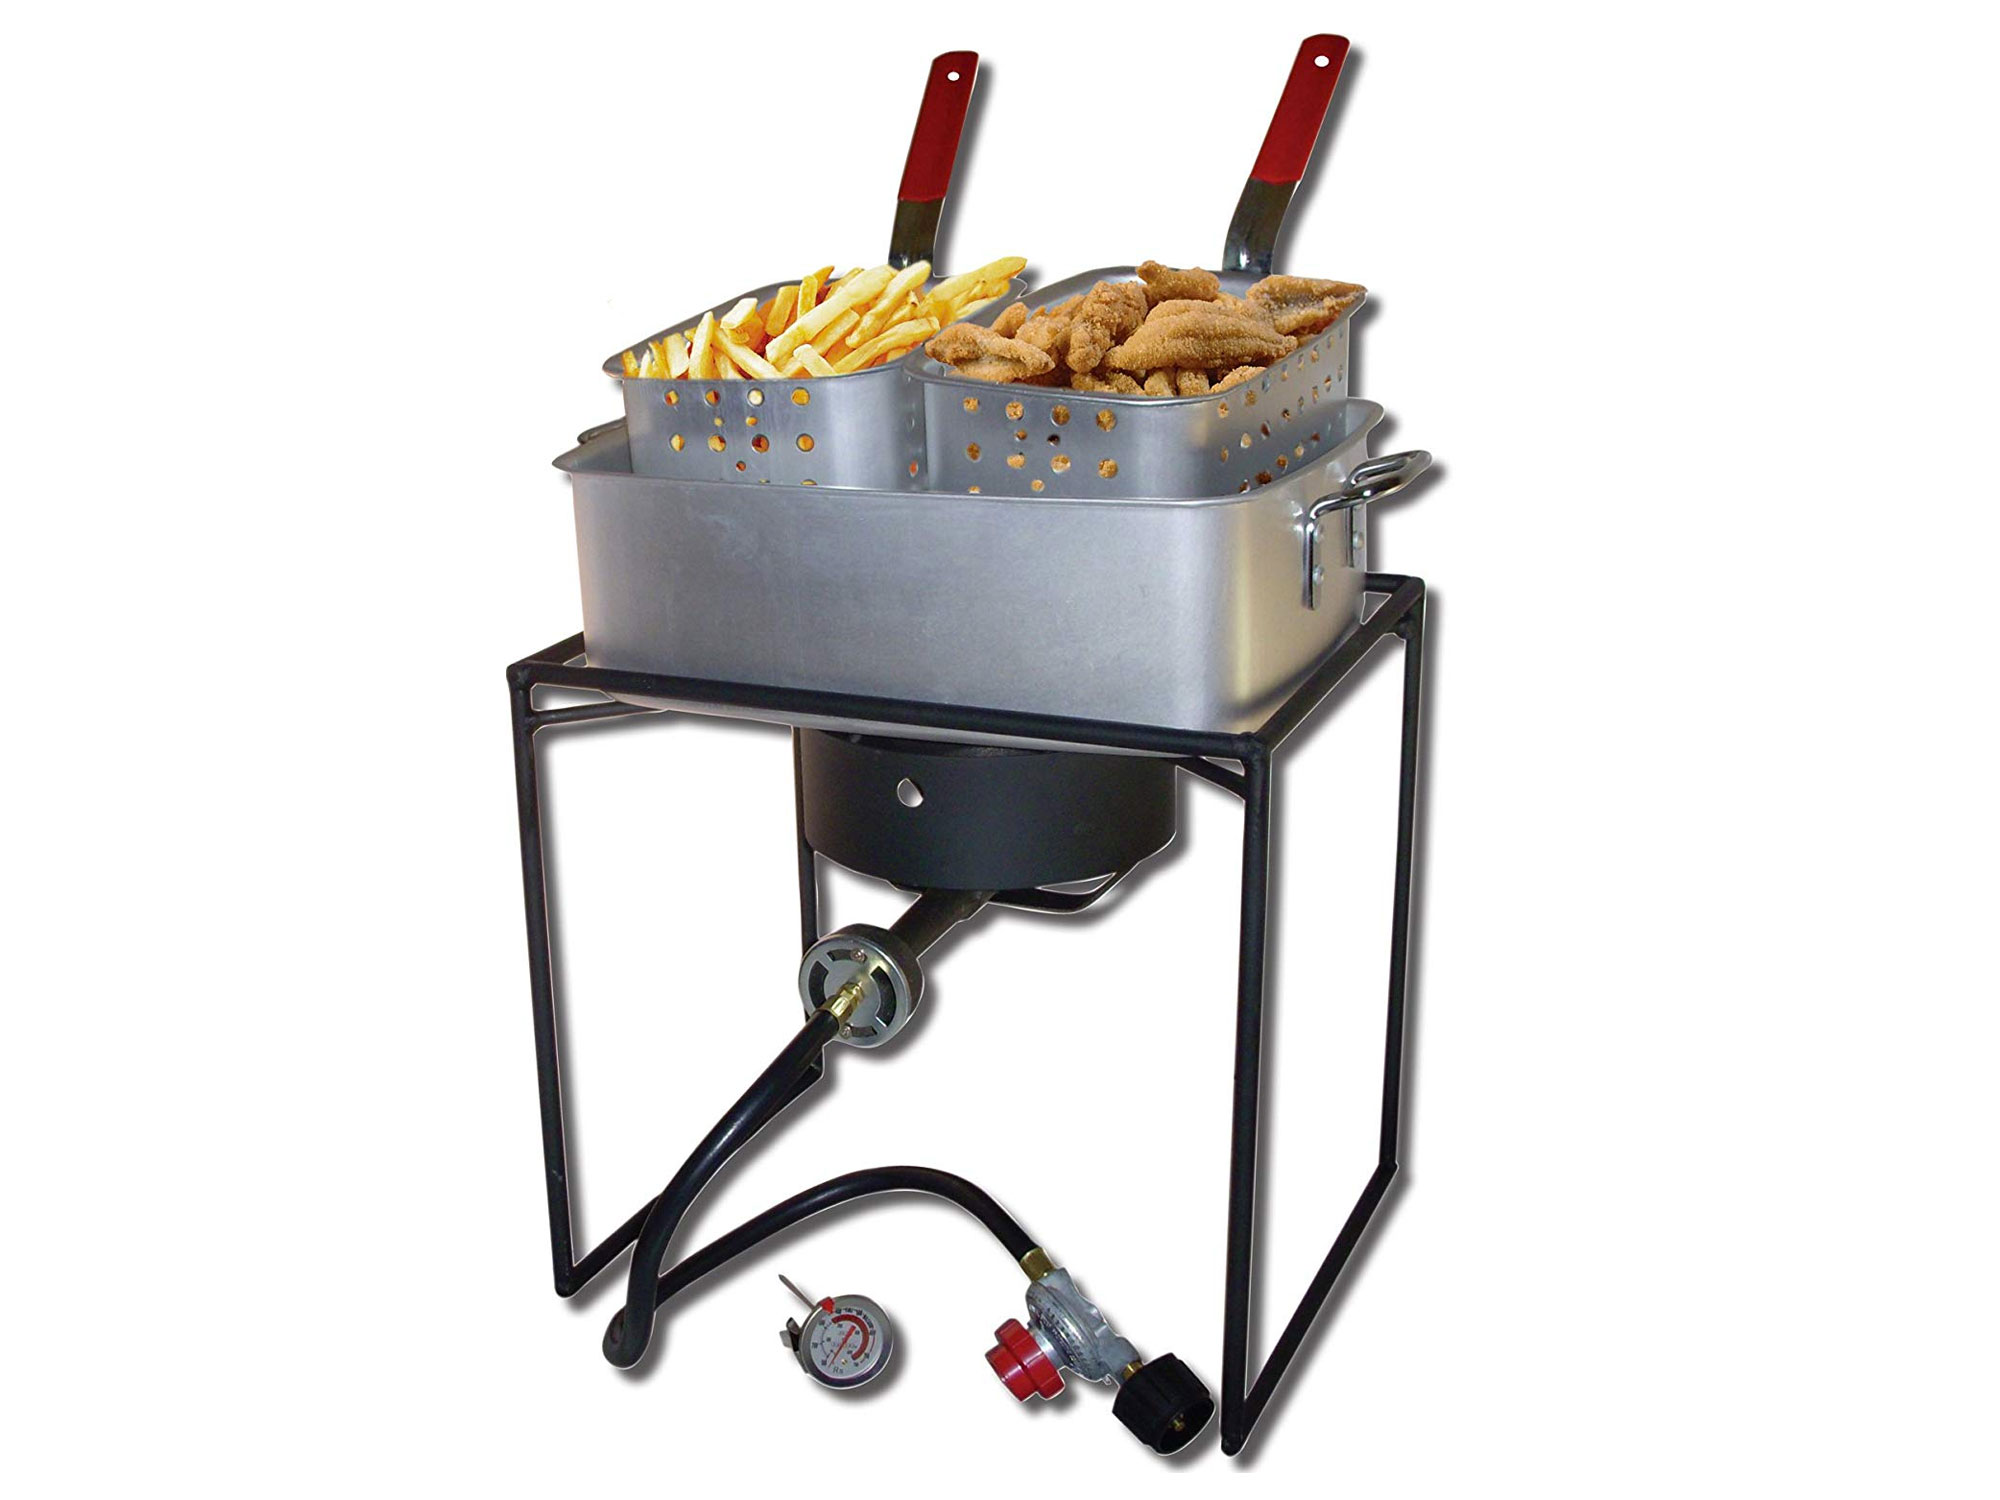 King Kooker 16-Inch Propane Outdoor Cooker with Aluminum Pan and 2 Frying Baskets